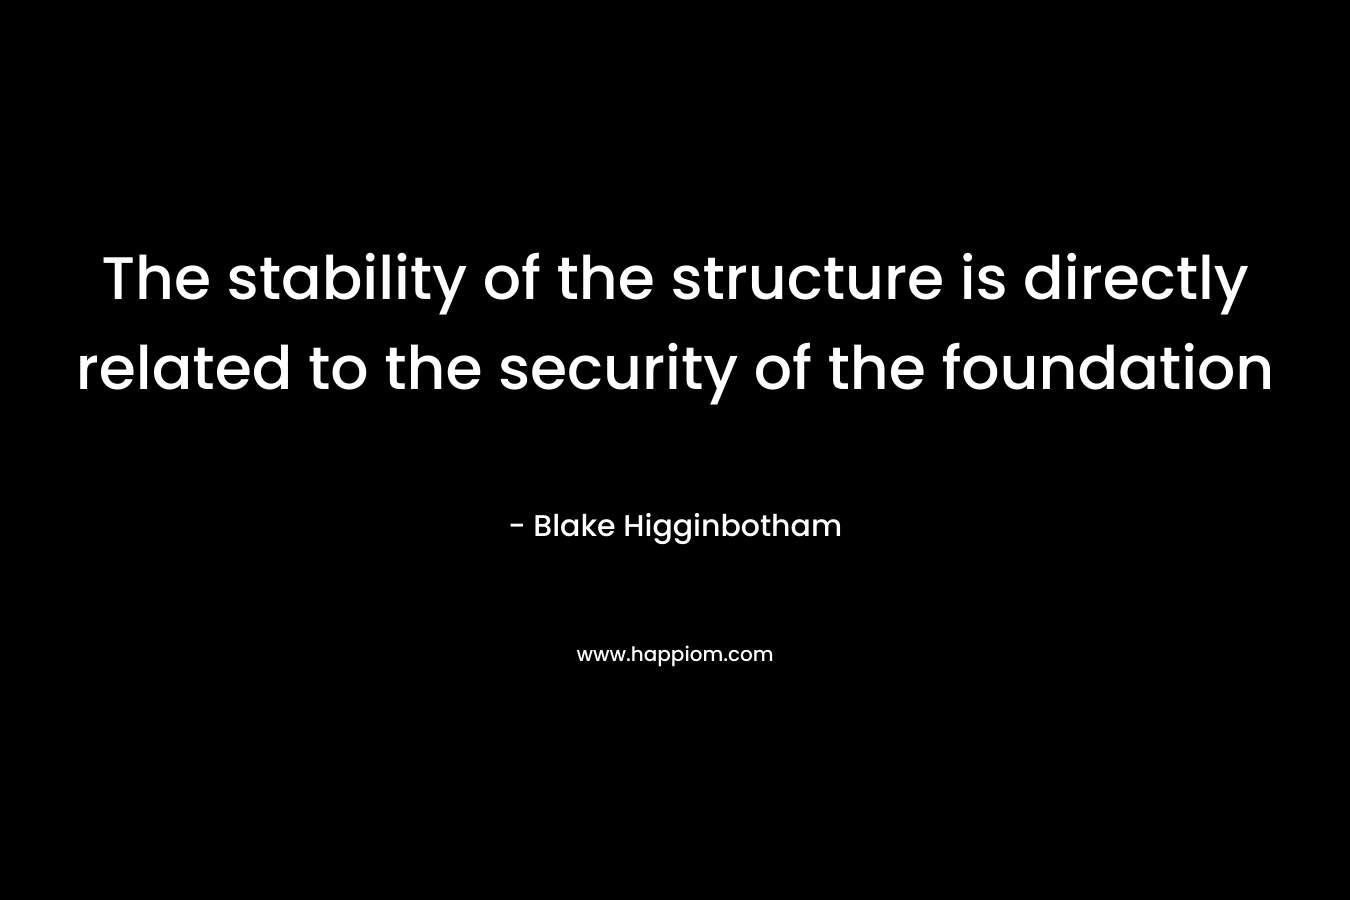 The stability of the structure is directly related to the security of the foundation – Blake Higginbotham